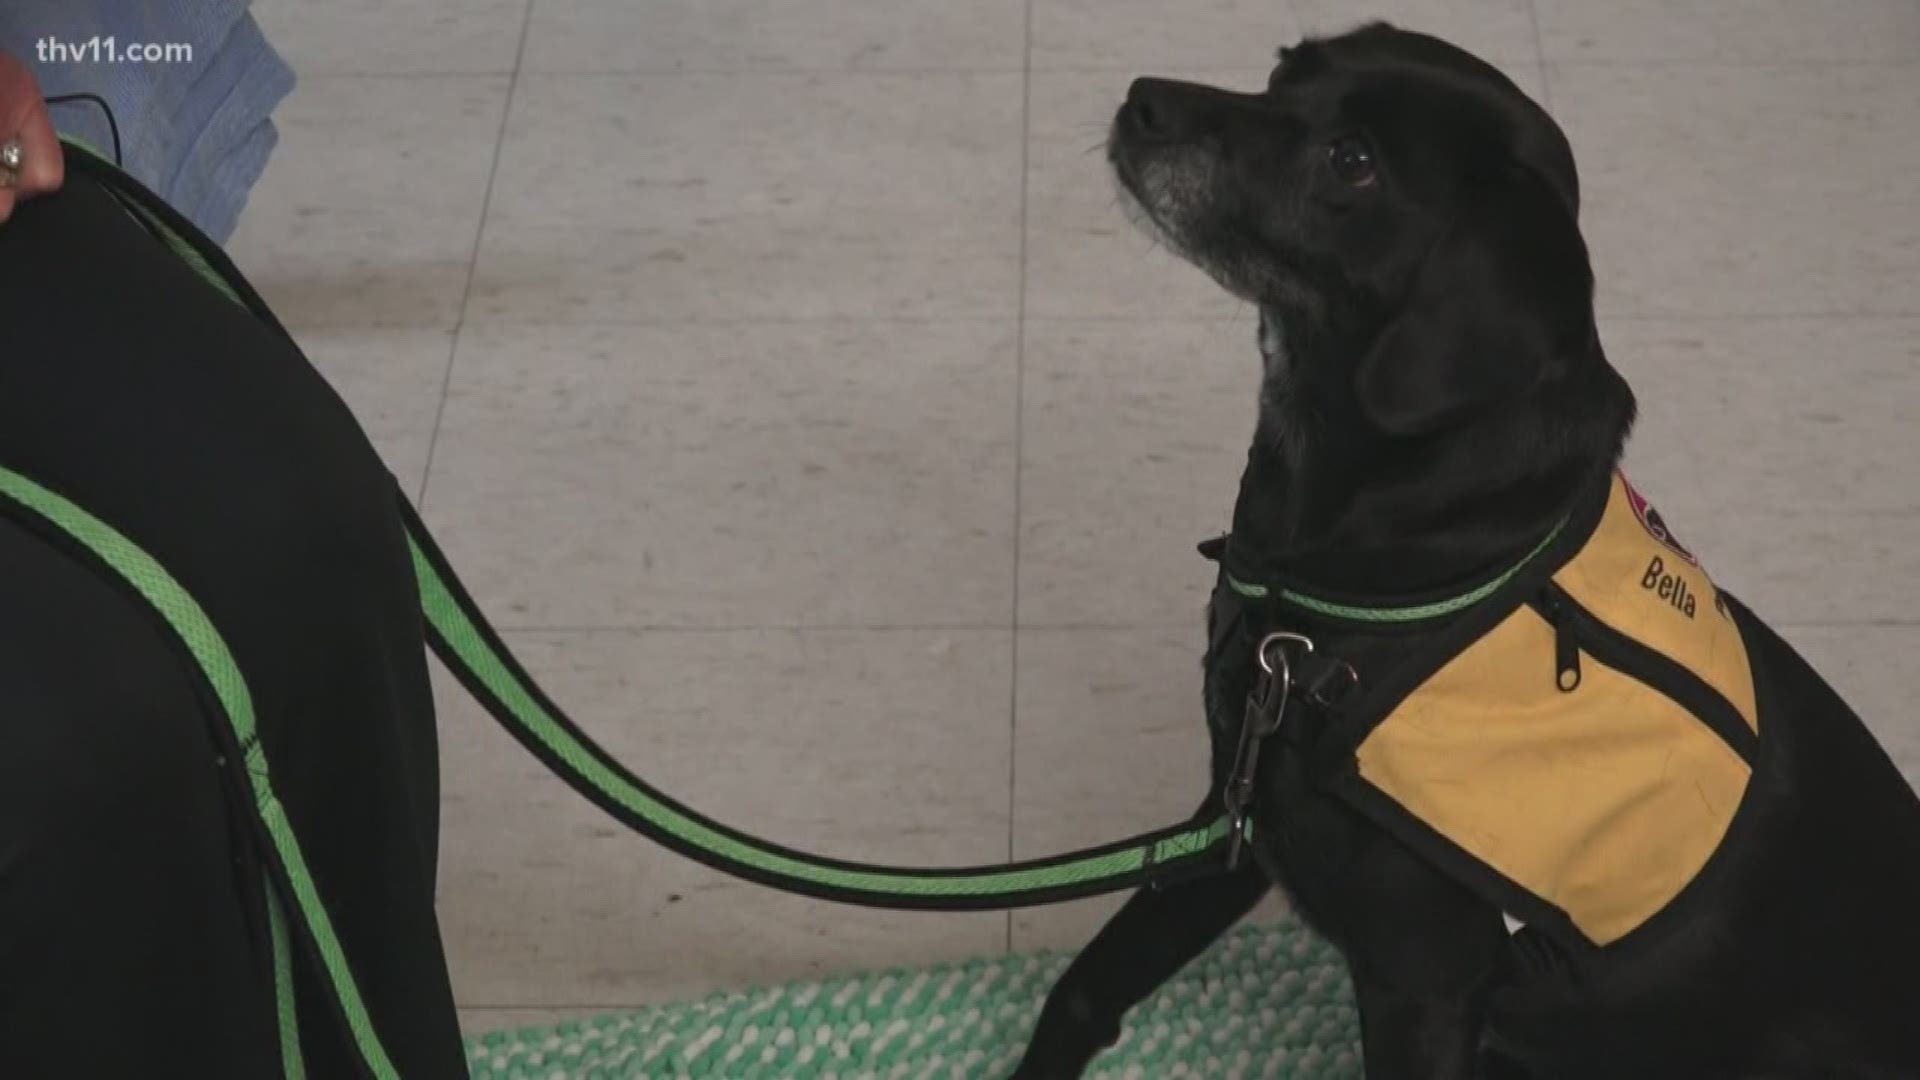 Saline Memorial Hospital hires therapy dog for staff, patients 